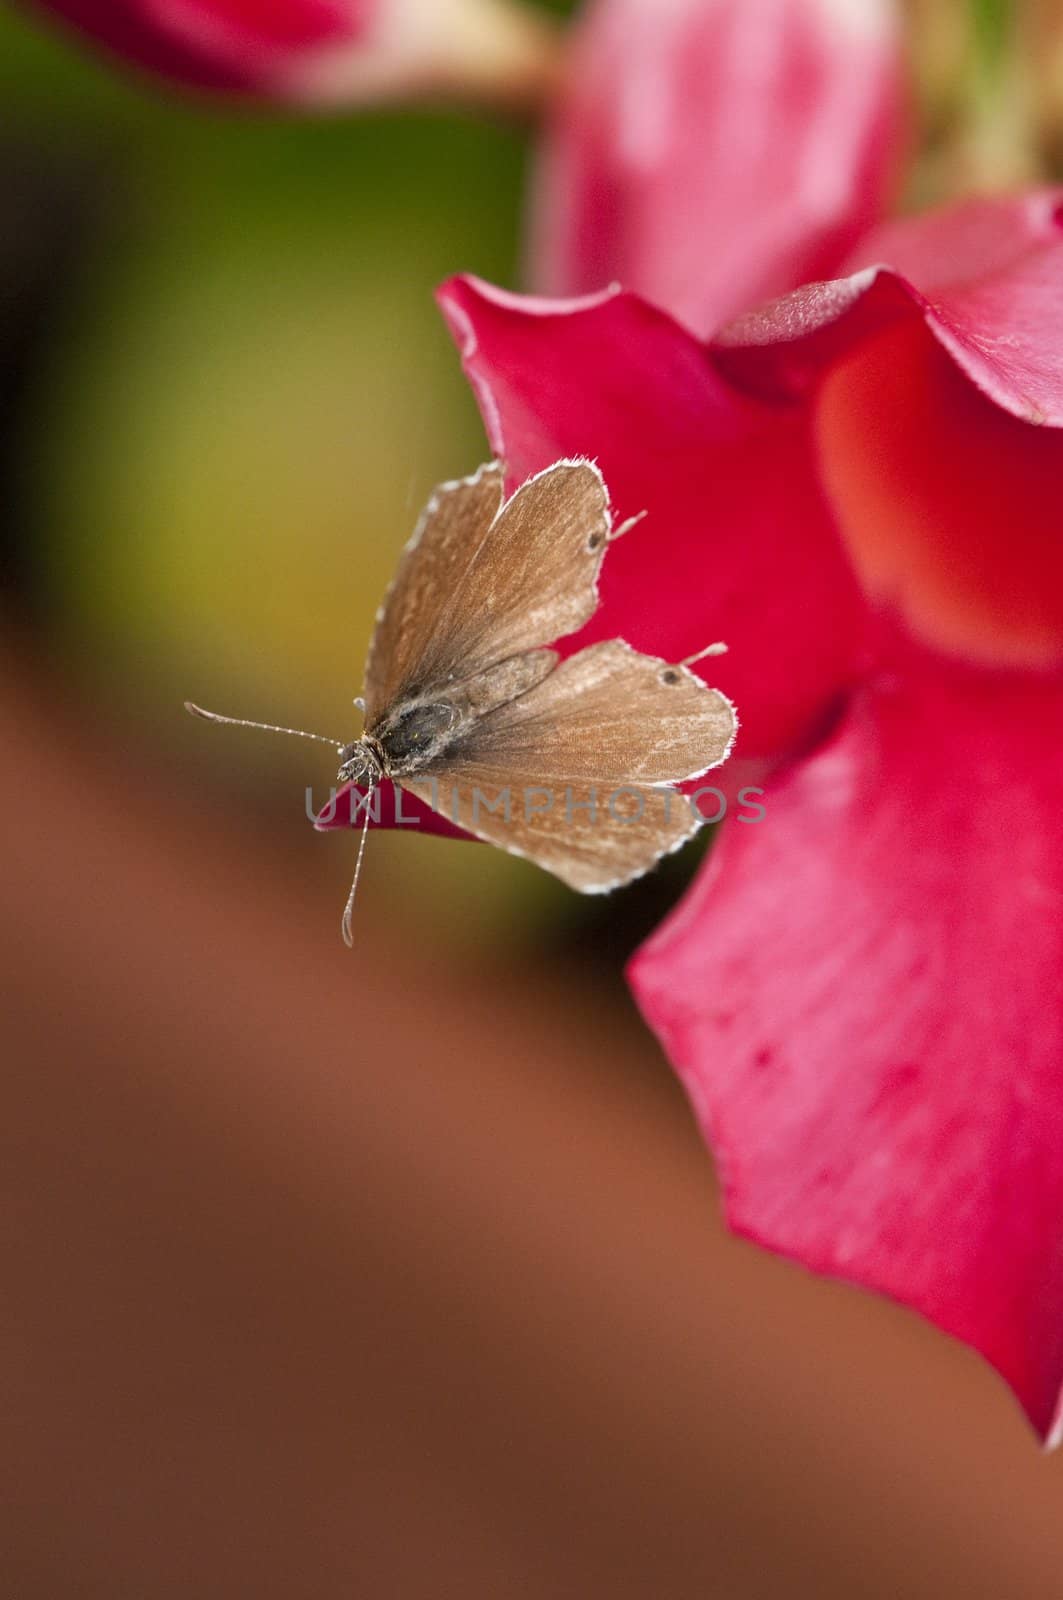 Close-up of a brown butterfly on a pink flower petal